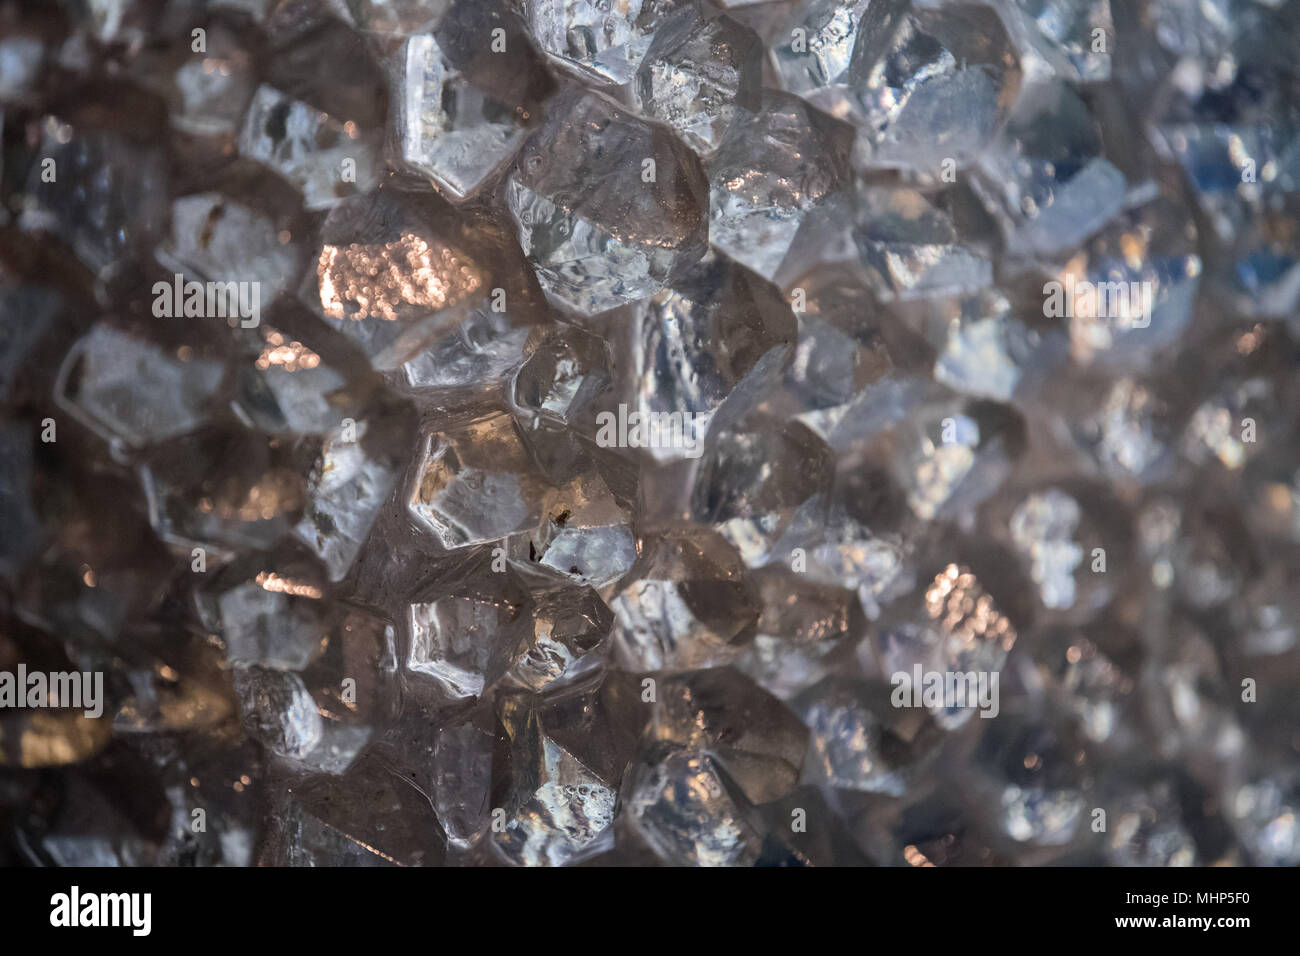 1,600+ Raw Diamonds Stock Photos, Pictures & Royalty-Free Images